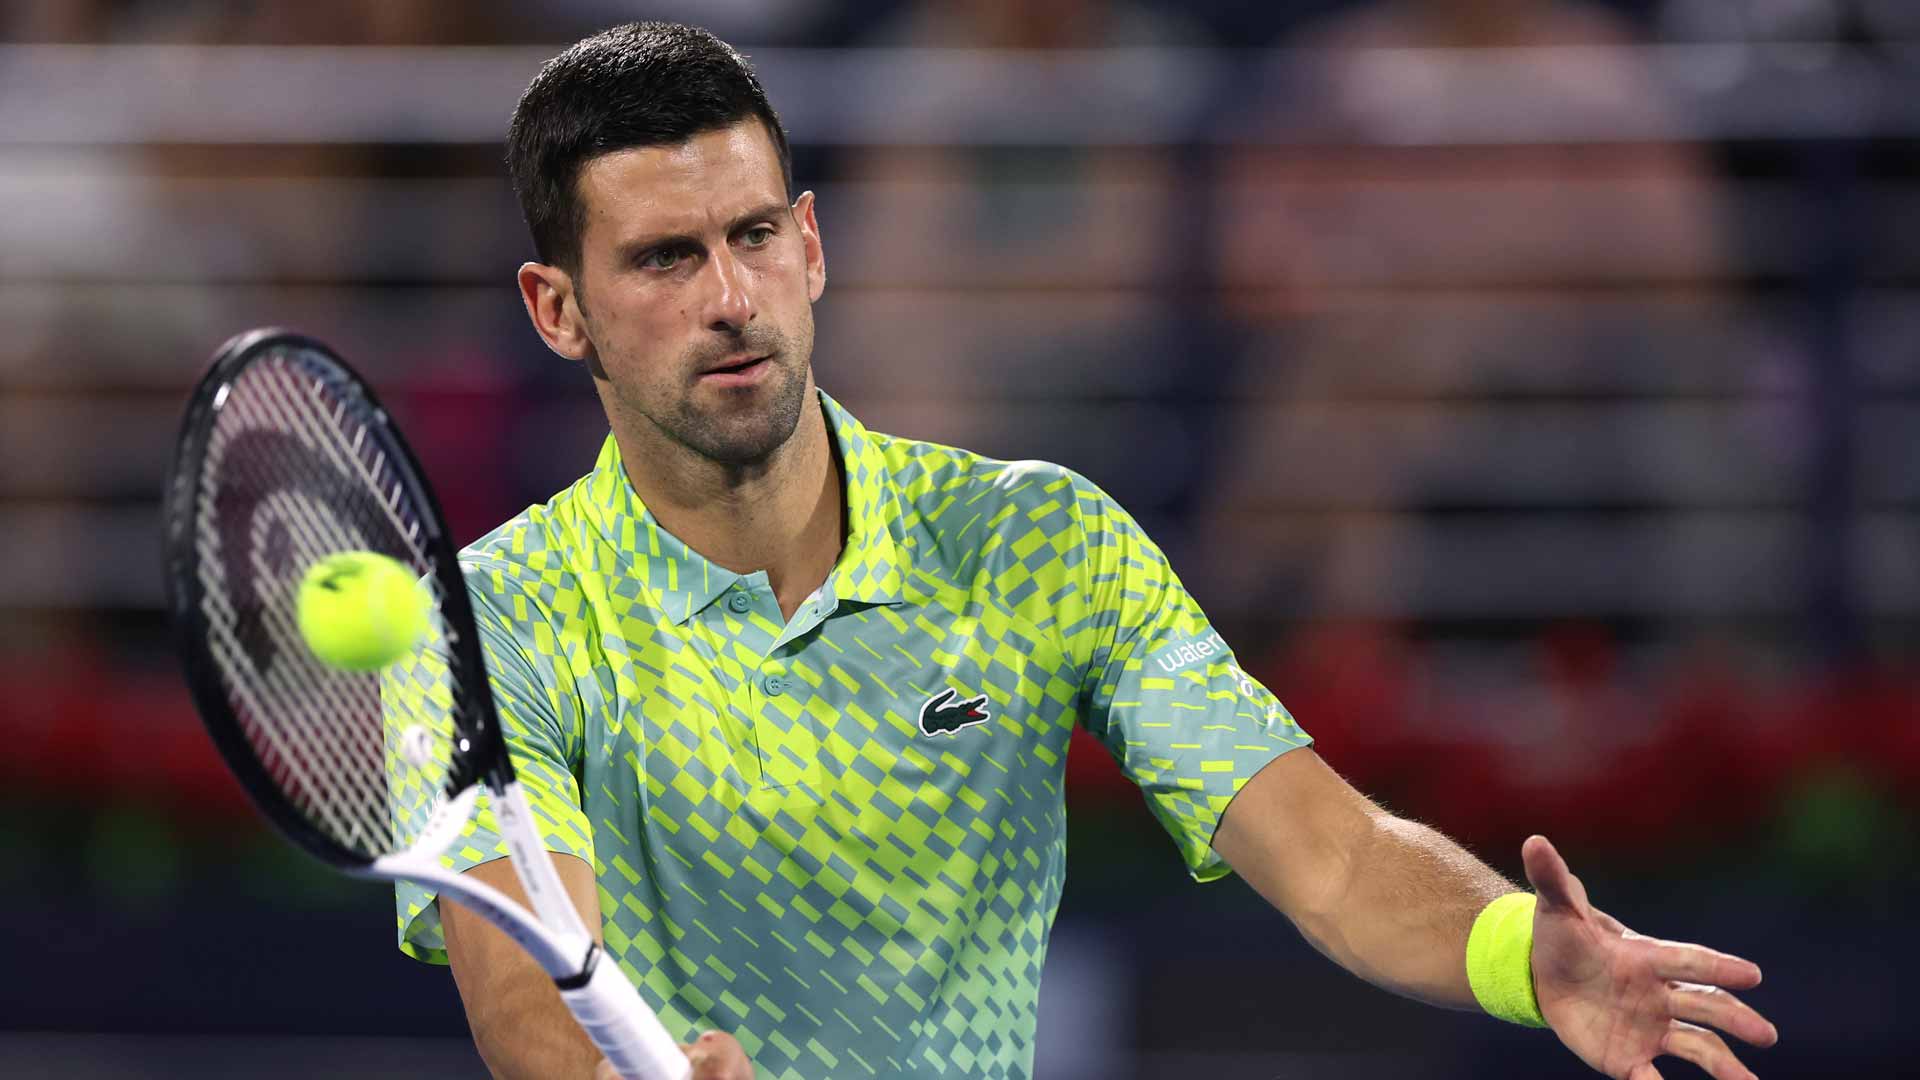 Novak Djokovic will next be in action at the Rolex Monte-Carlo Masters.